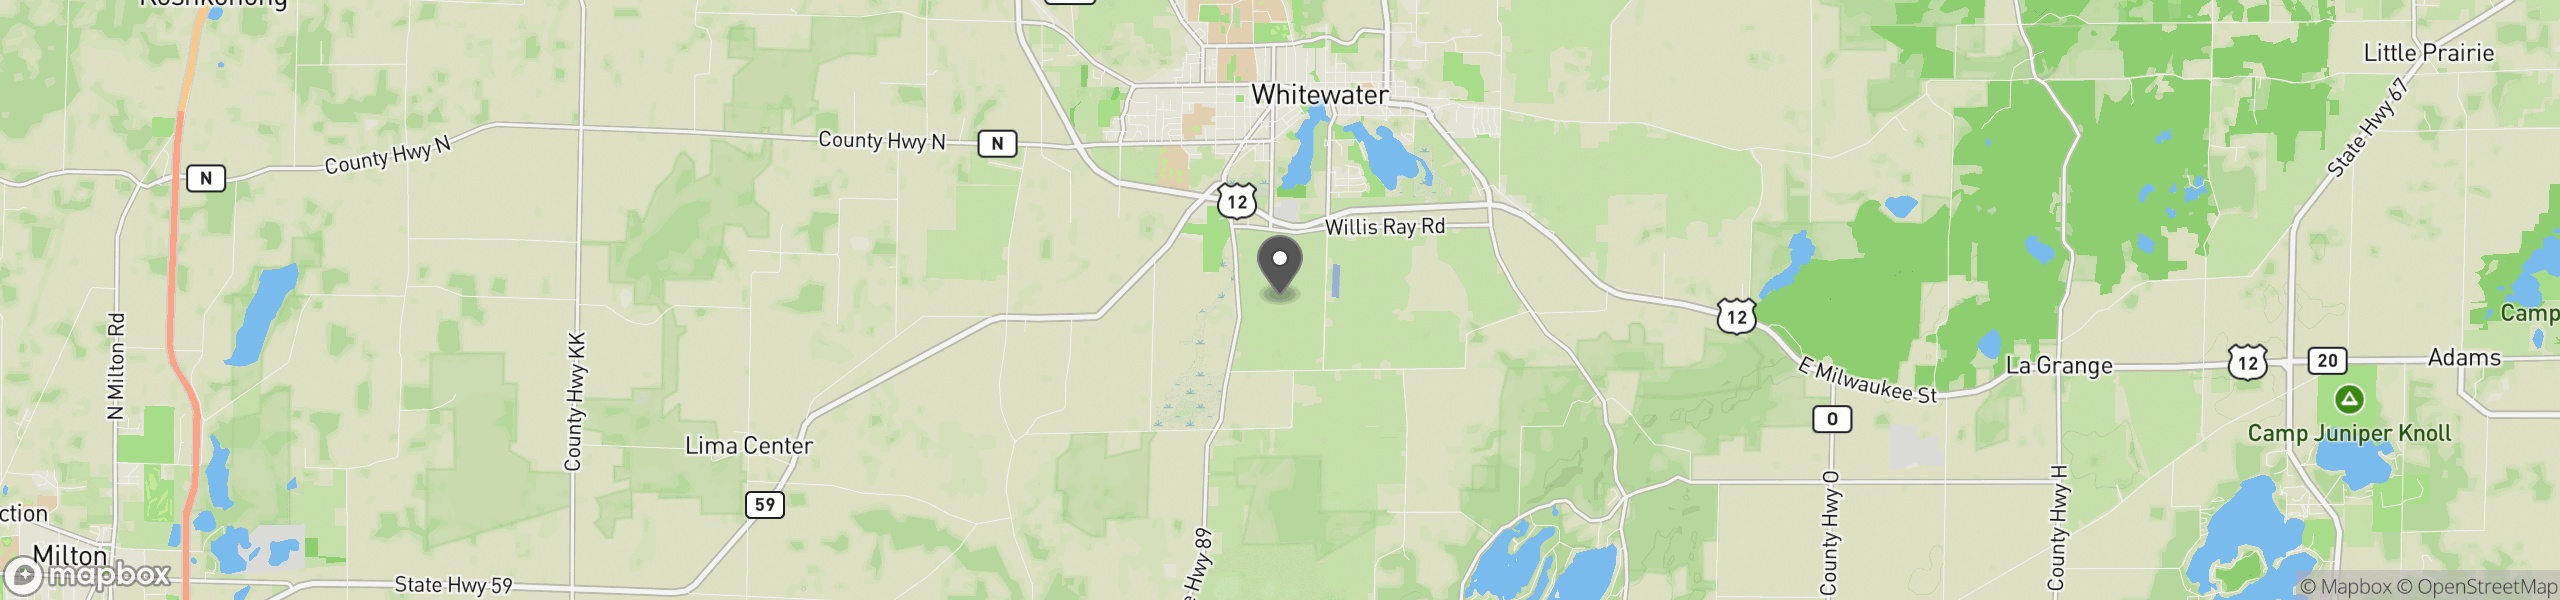 Whitewater, WI 53190